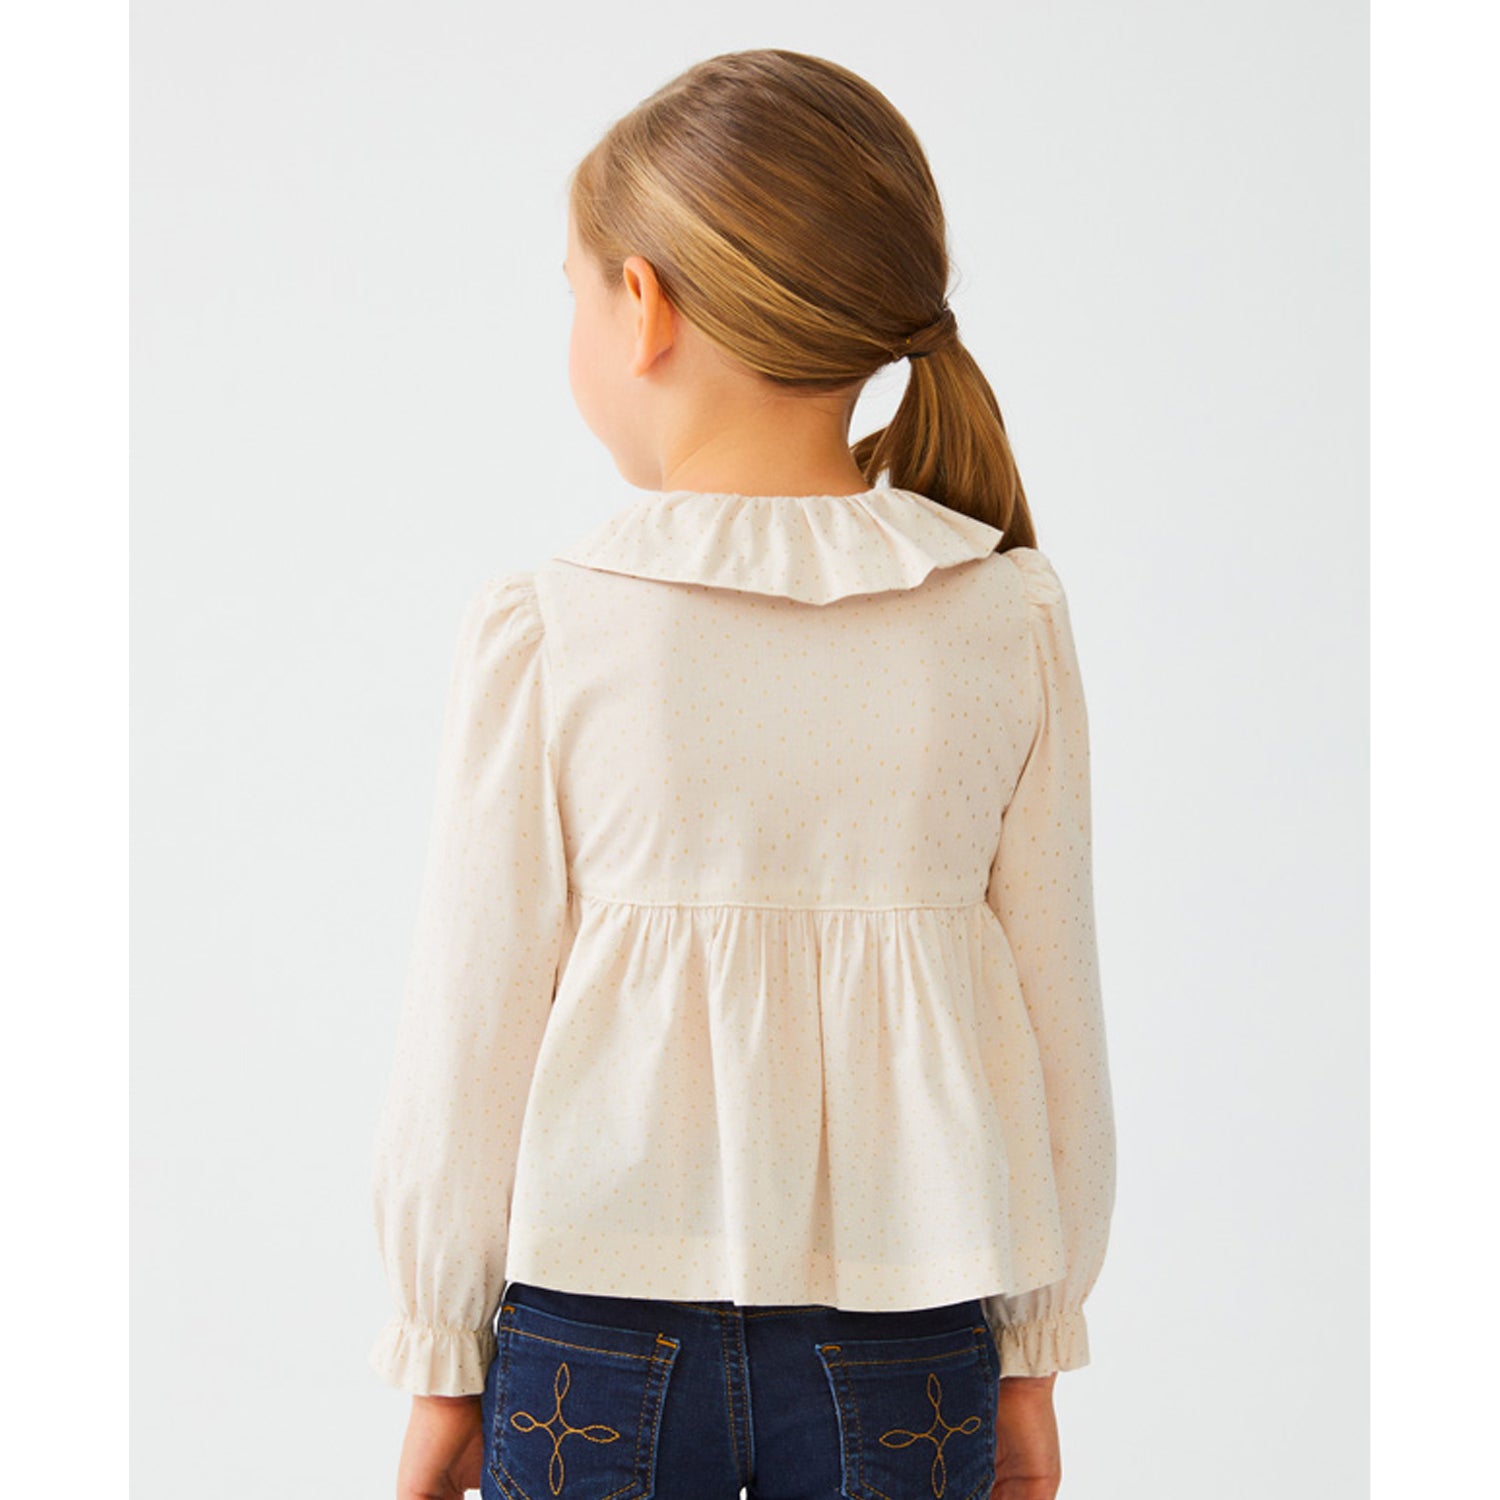 Ivory Blouse With Golden Polka Dots